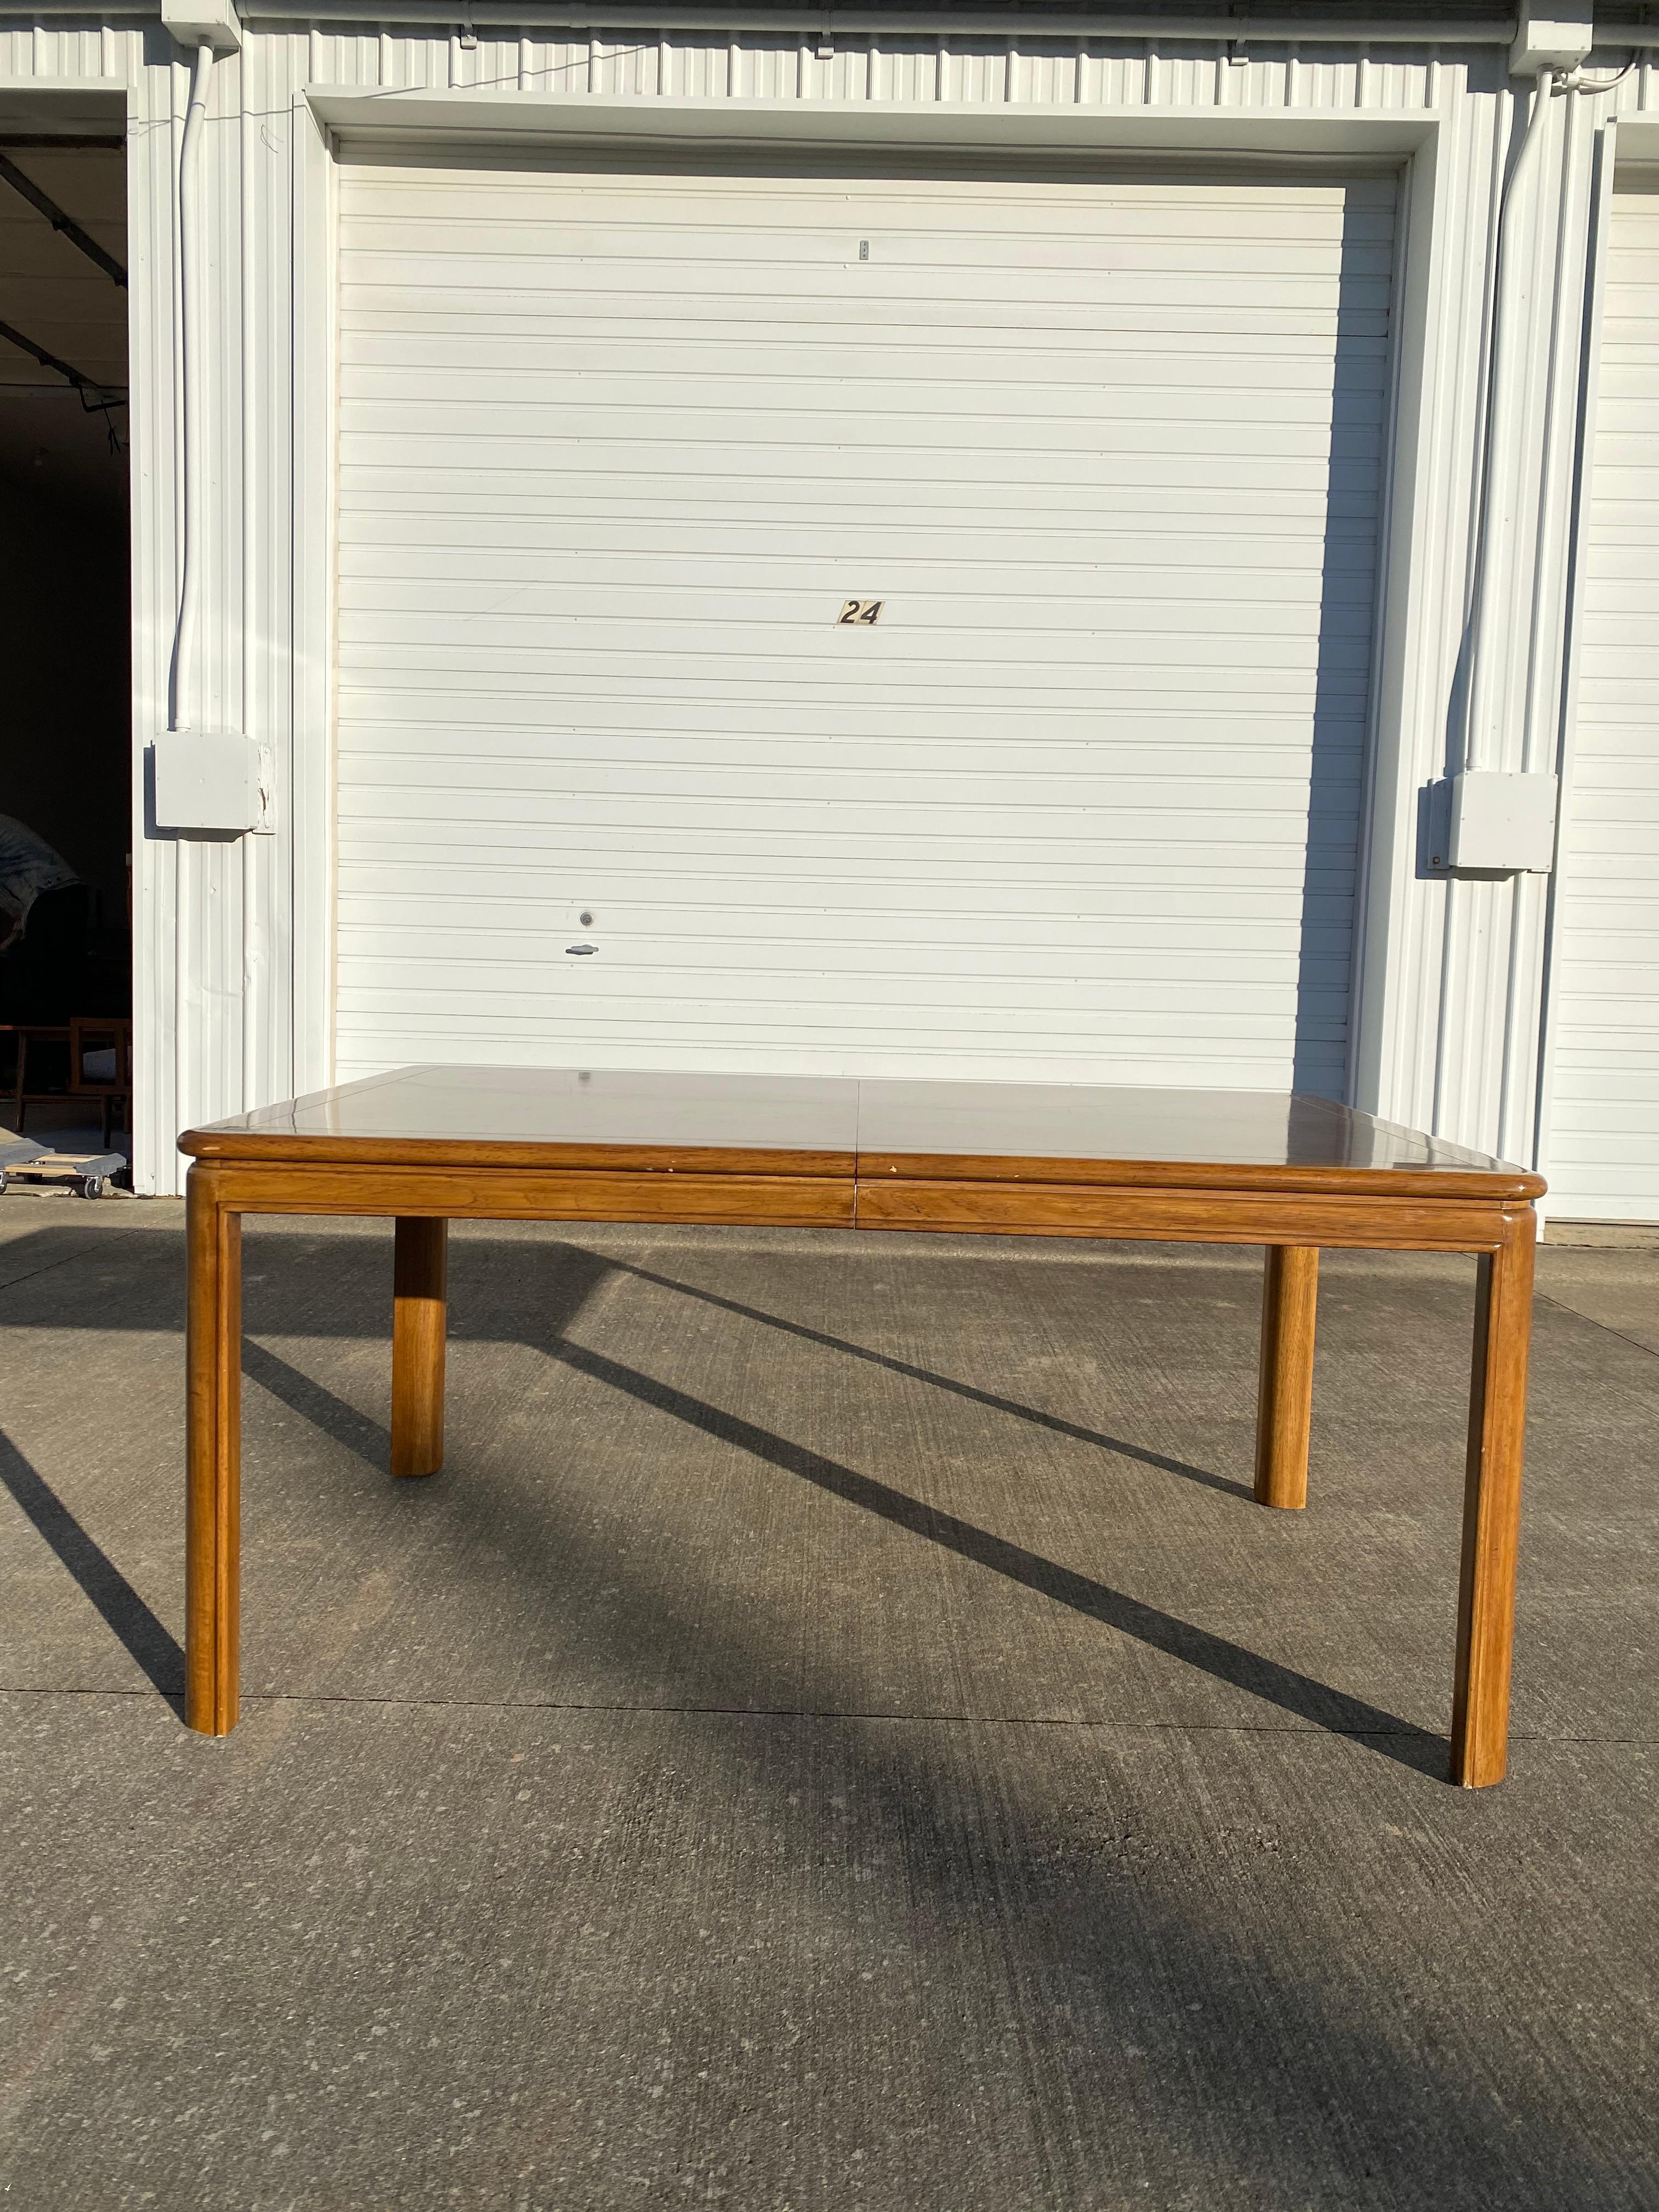 Very large Drexel Passage Postmodern Dining Table w/ 2 Leaves!! It does have some wear to it but it doesn't have any structural damages. Great for large family's or gatherings!

Both leaves 104”w x 42d x 29h
64